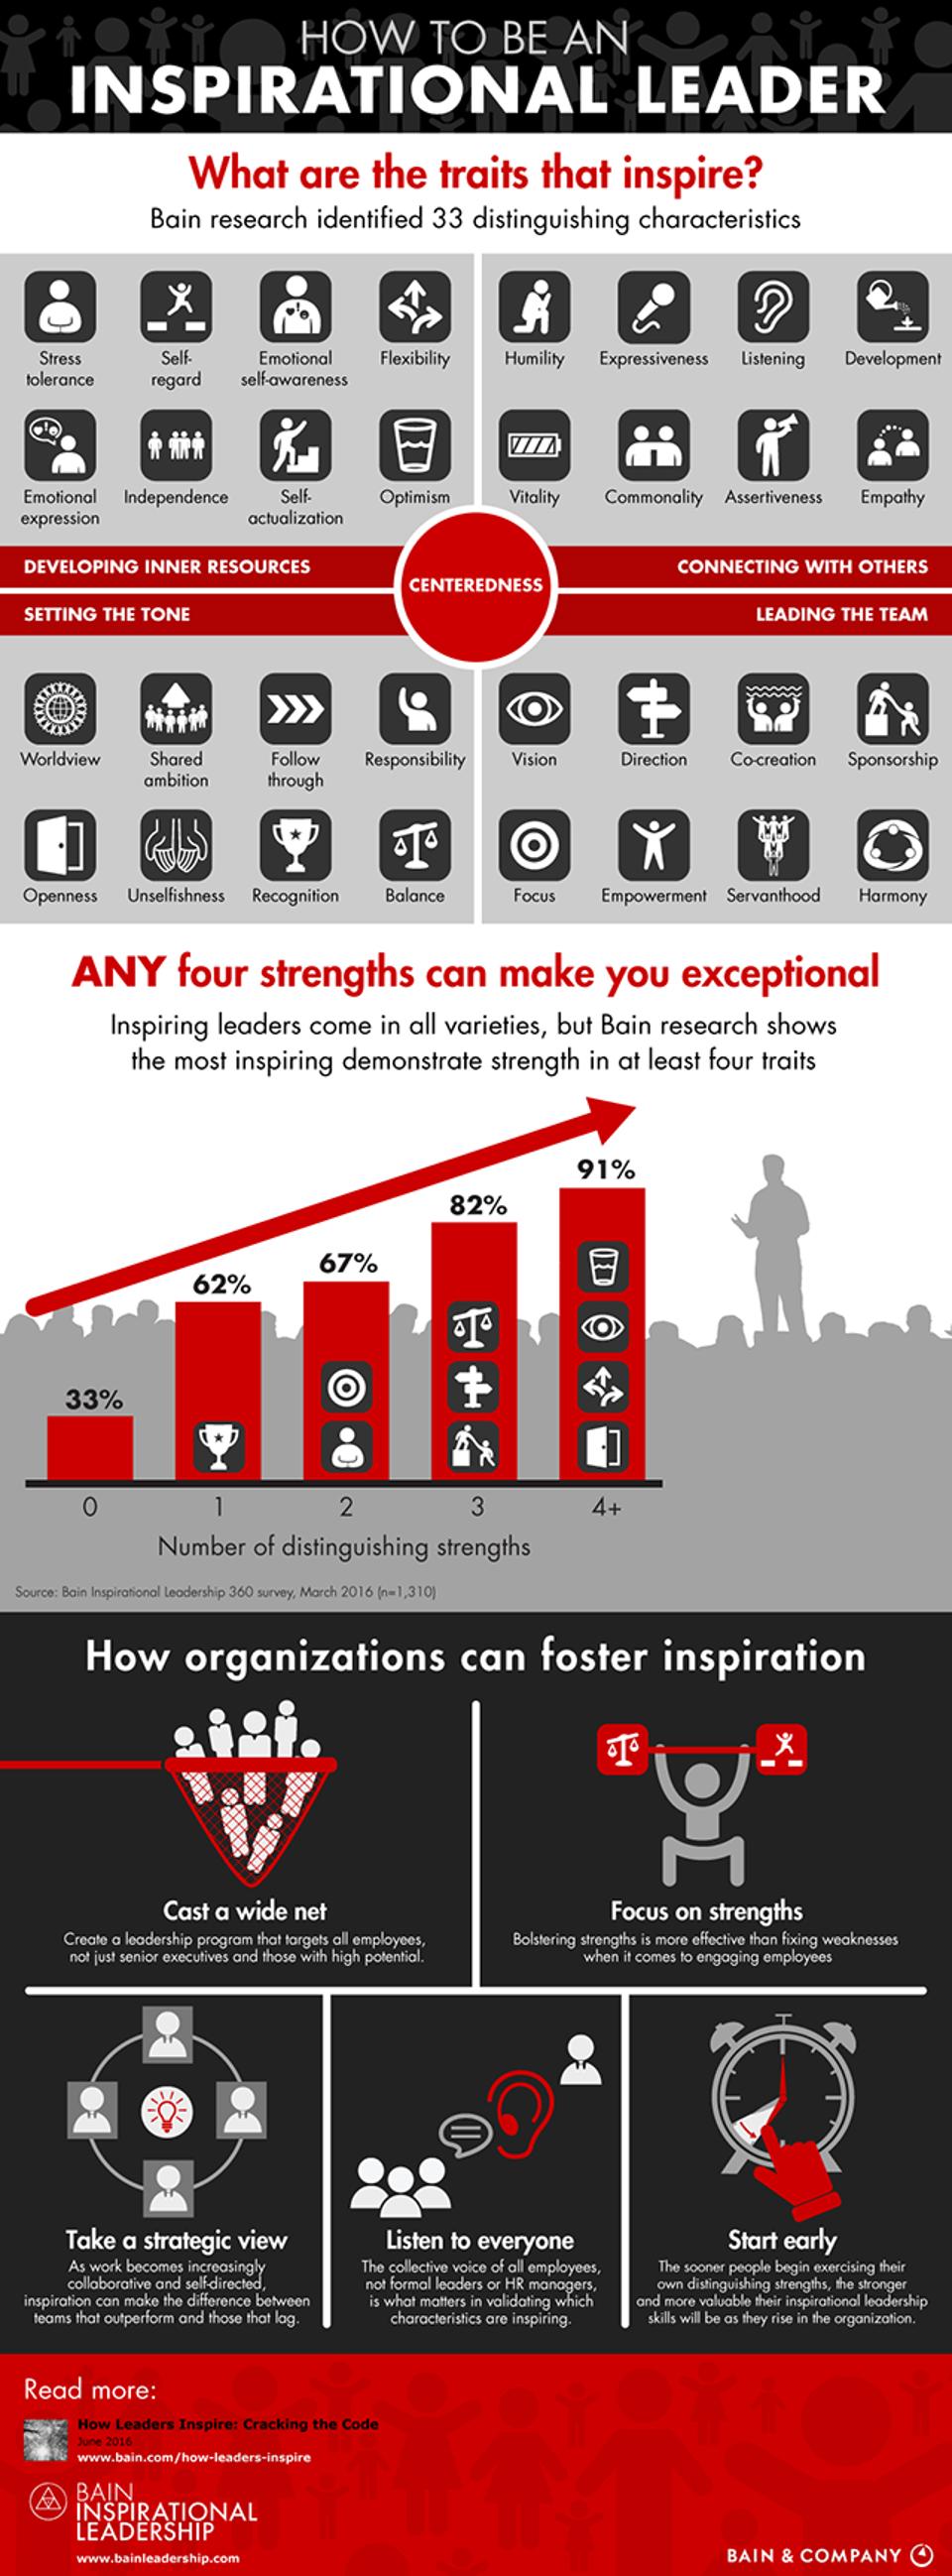 Inspirational-Leadership-infographic-forbes